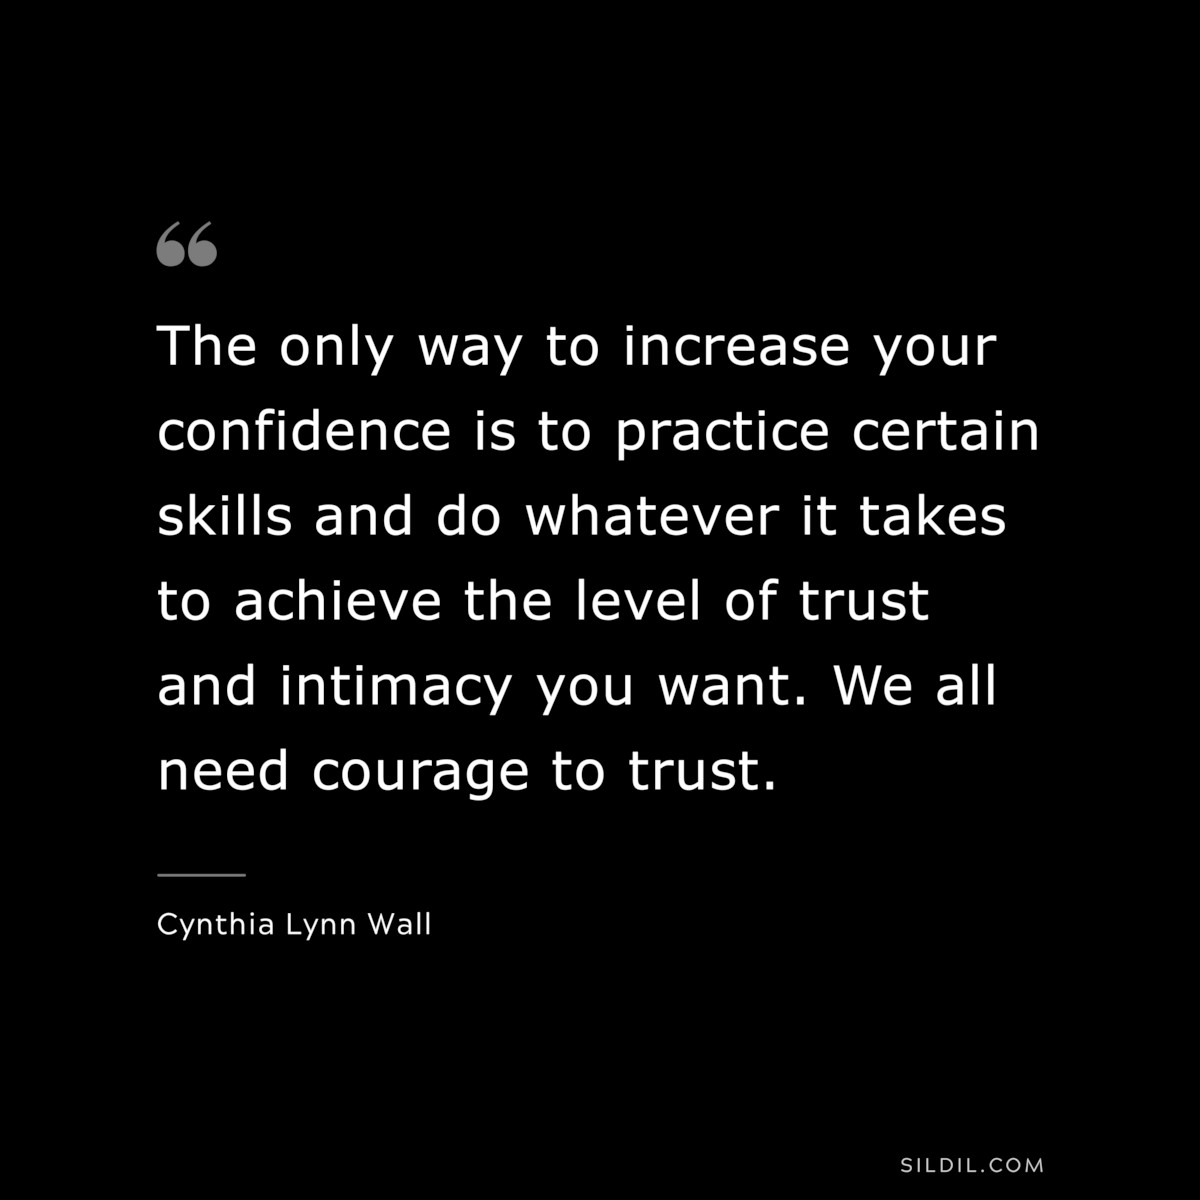 The only way to increase your confidence is to practice certain skills and do whatever it takes to achieve the level of trust and intimacy you want. We all need courage to trust. ― Cynthia Lynn Wall